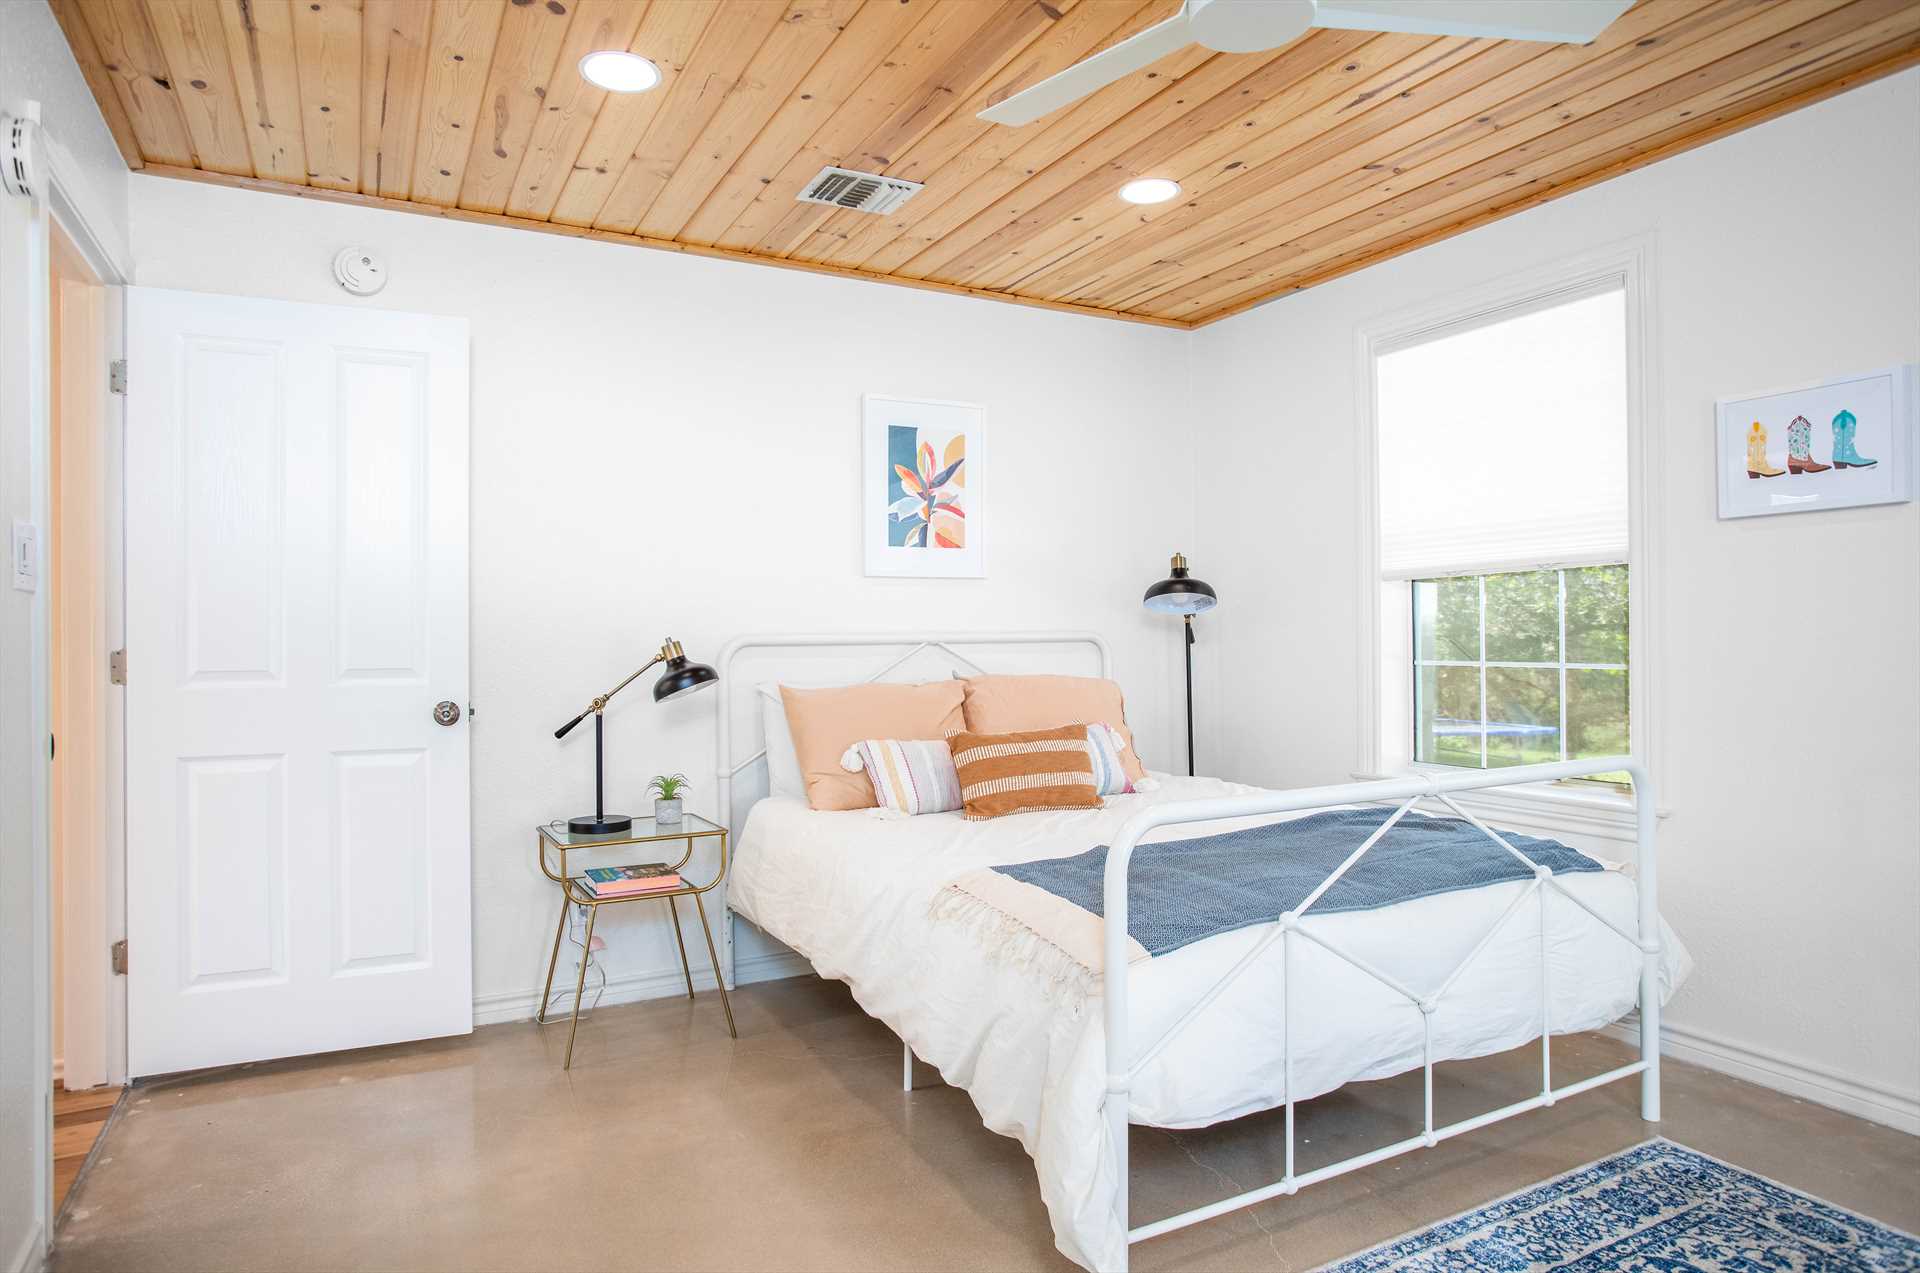                                                 A queen bed greets you in the airy and light second bedroom! All in all, the Retreat sleeps eight people (and up to 12 if you rent the optional suite).